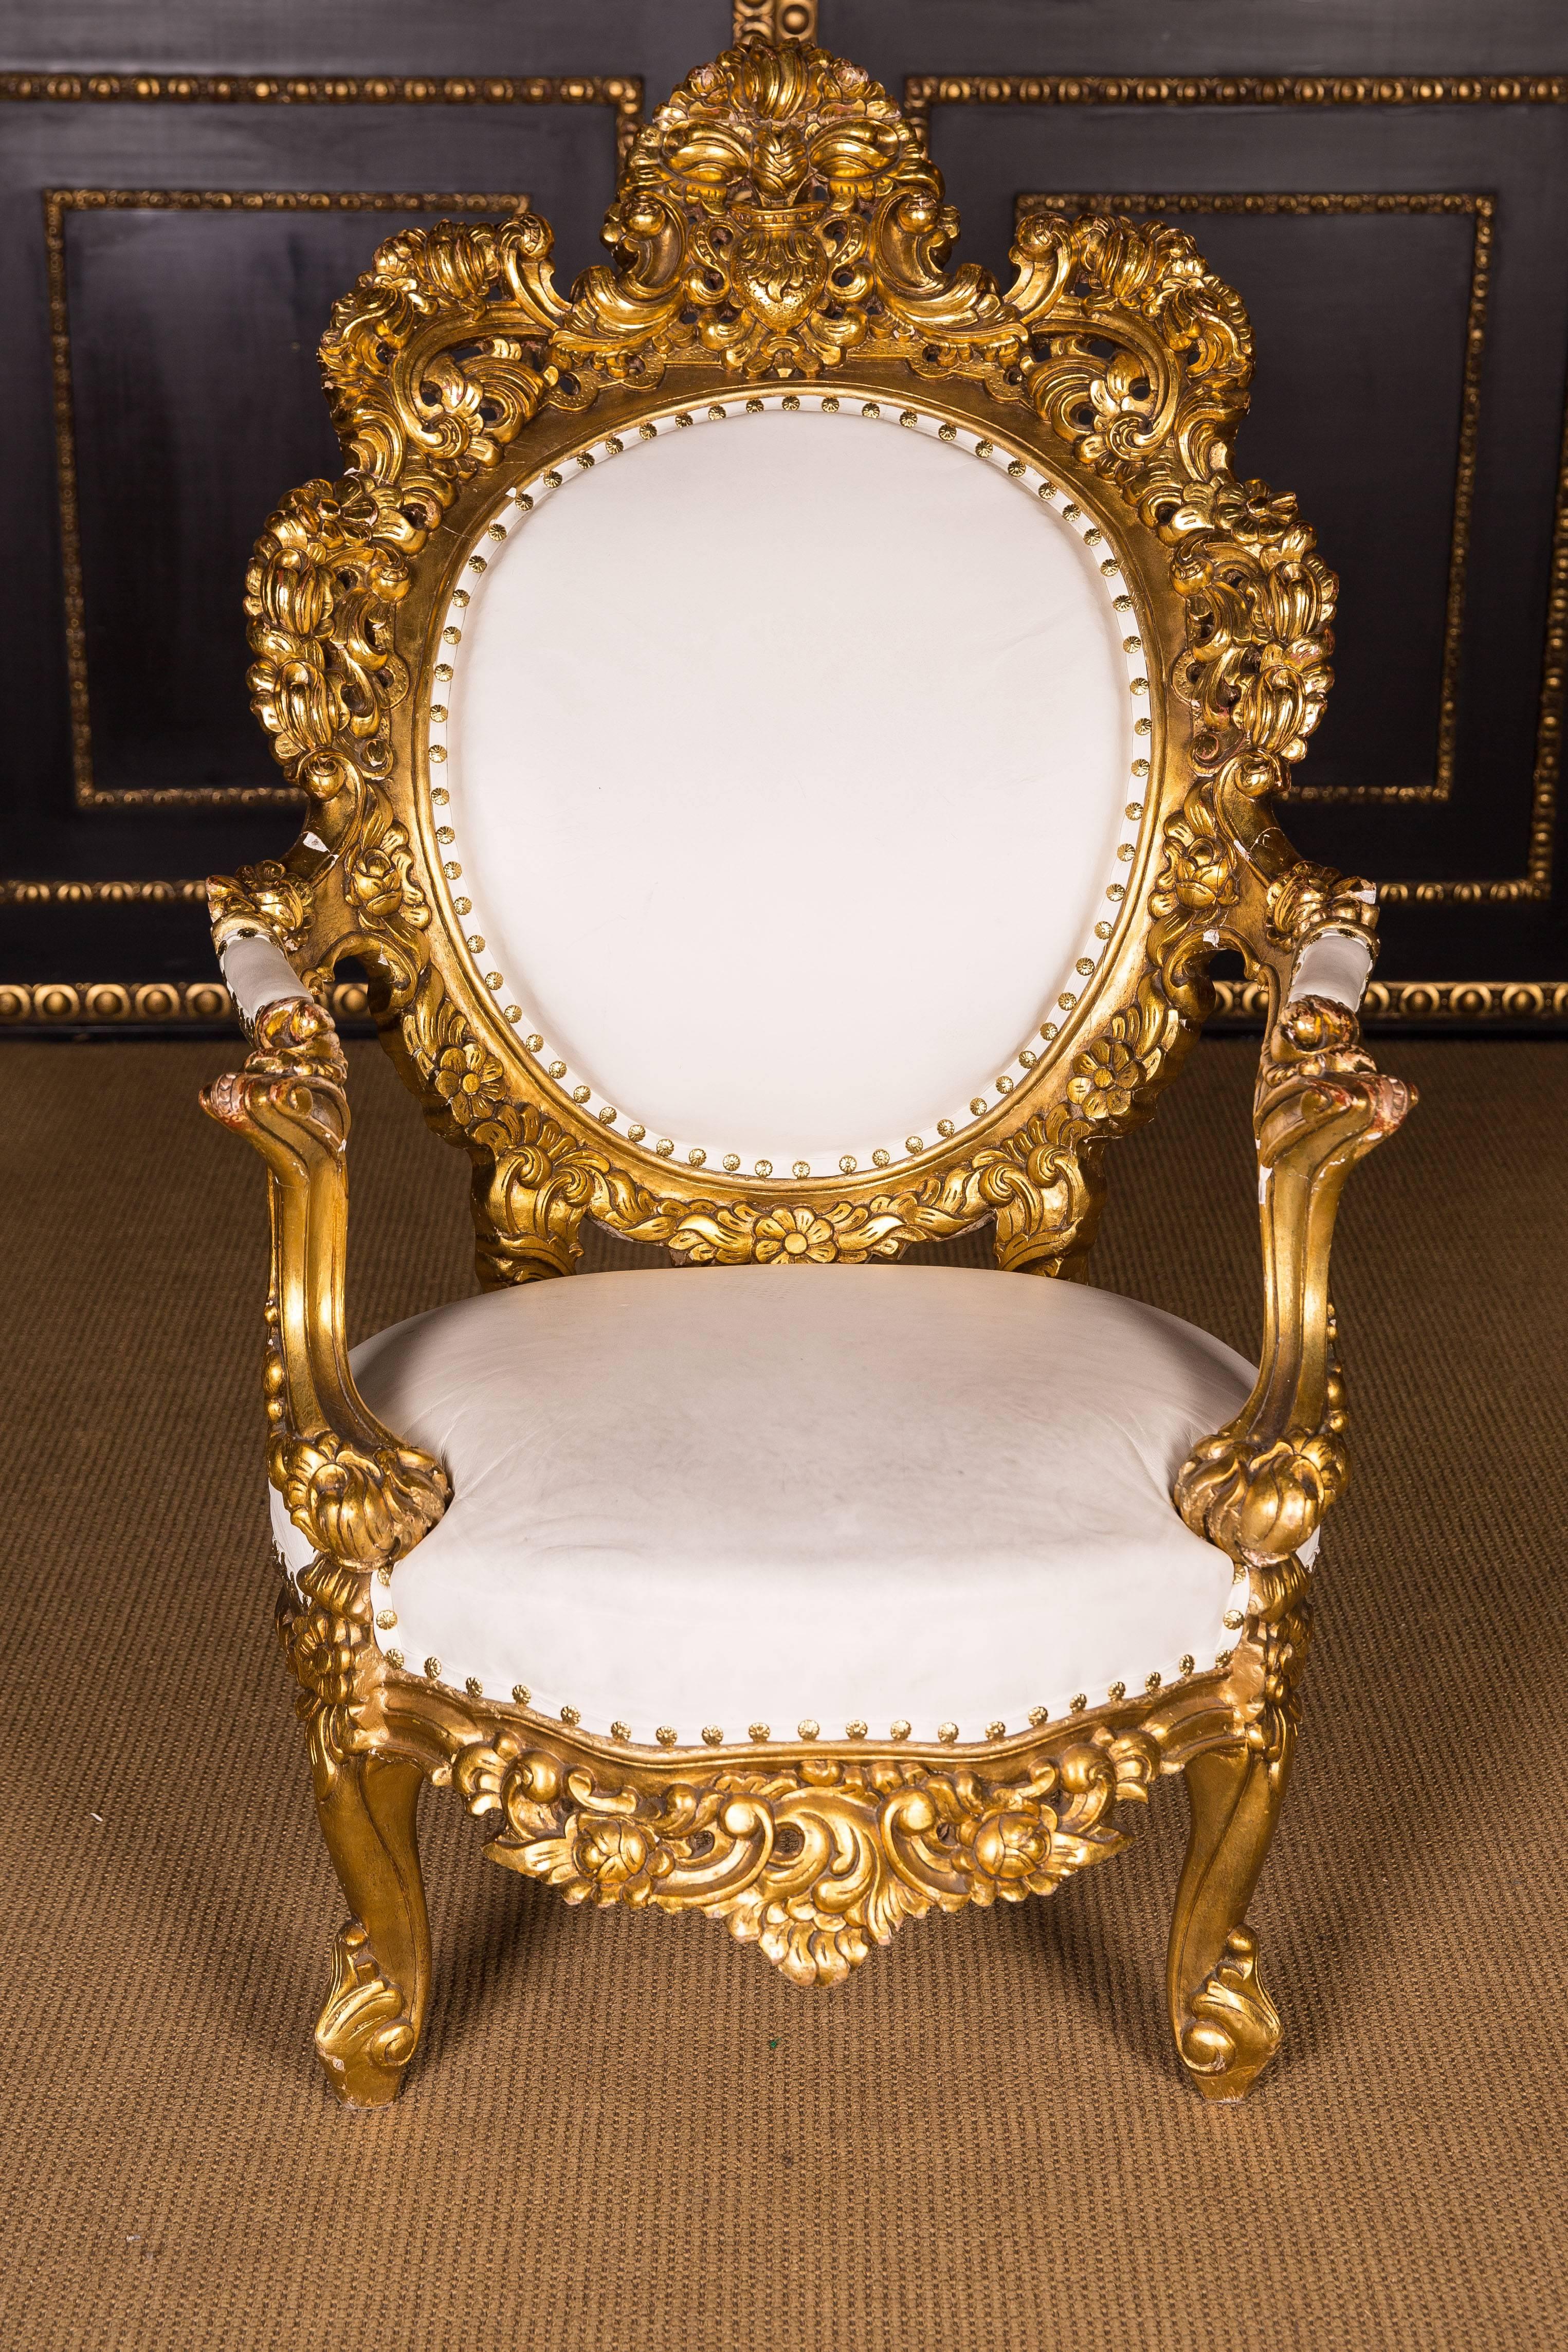 Pompouss massive beechwood, polished. Gold leaf, passively curved, profile-framed frame on curved legs. Short supports for slightly rising armrests. Shield-shaped backrest frame with floral carving. The seat and the backrest are finished with a